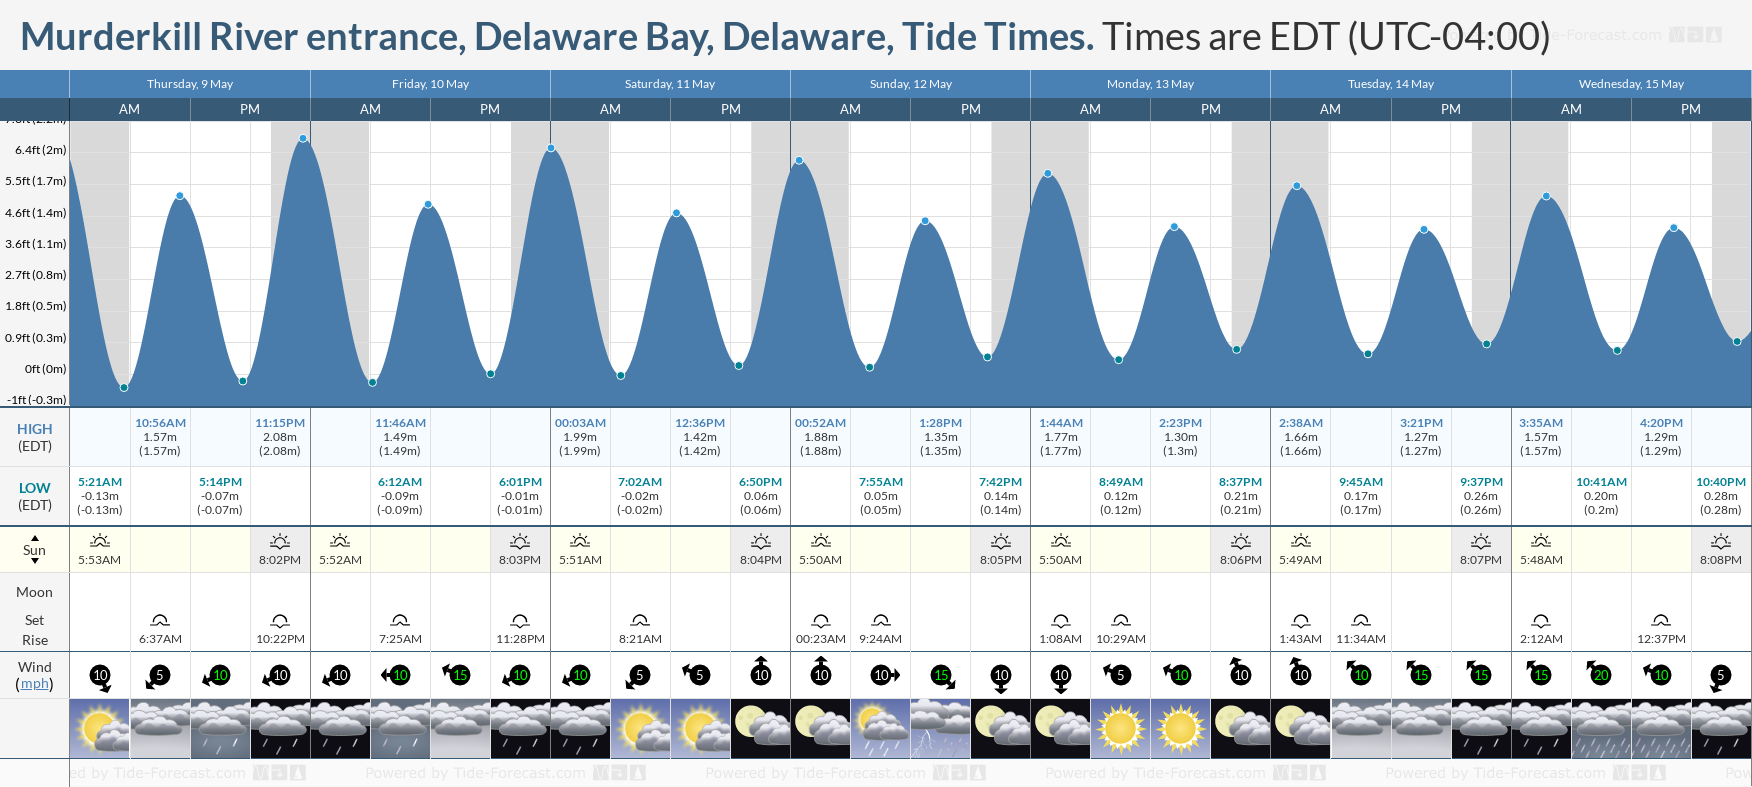 Murderkill River entrance, Delaware Bay, Delaware Tide Chart including high and low tide tide times for the next 7 days